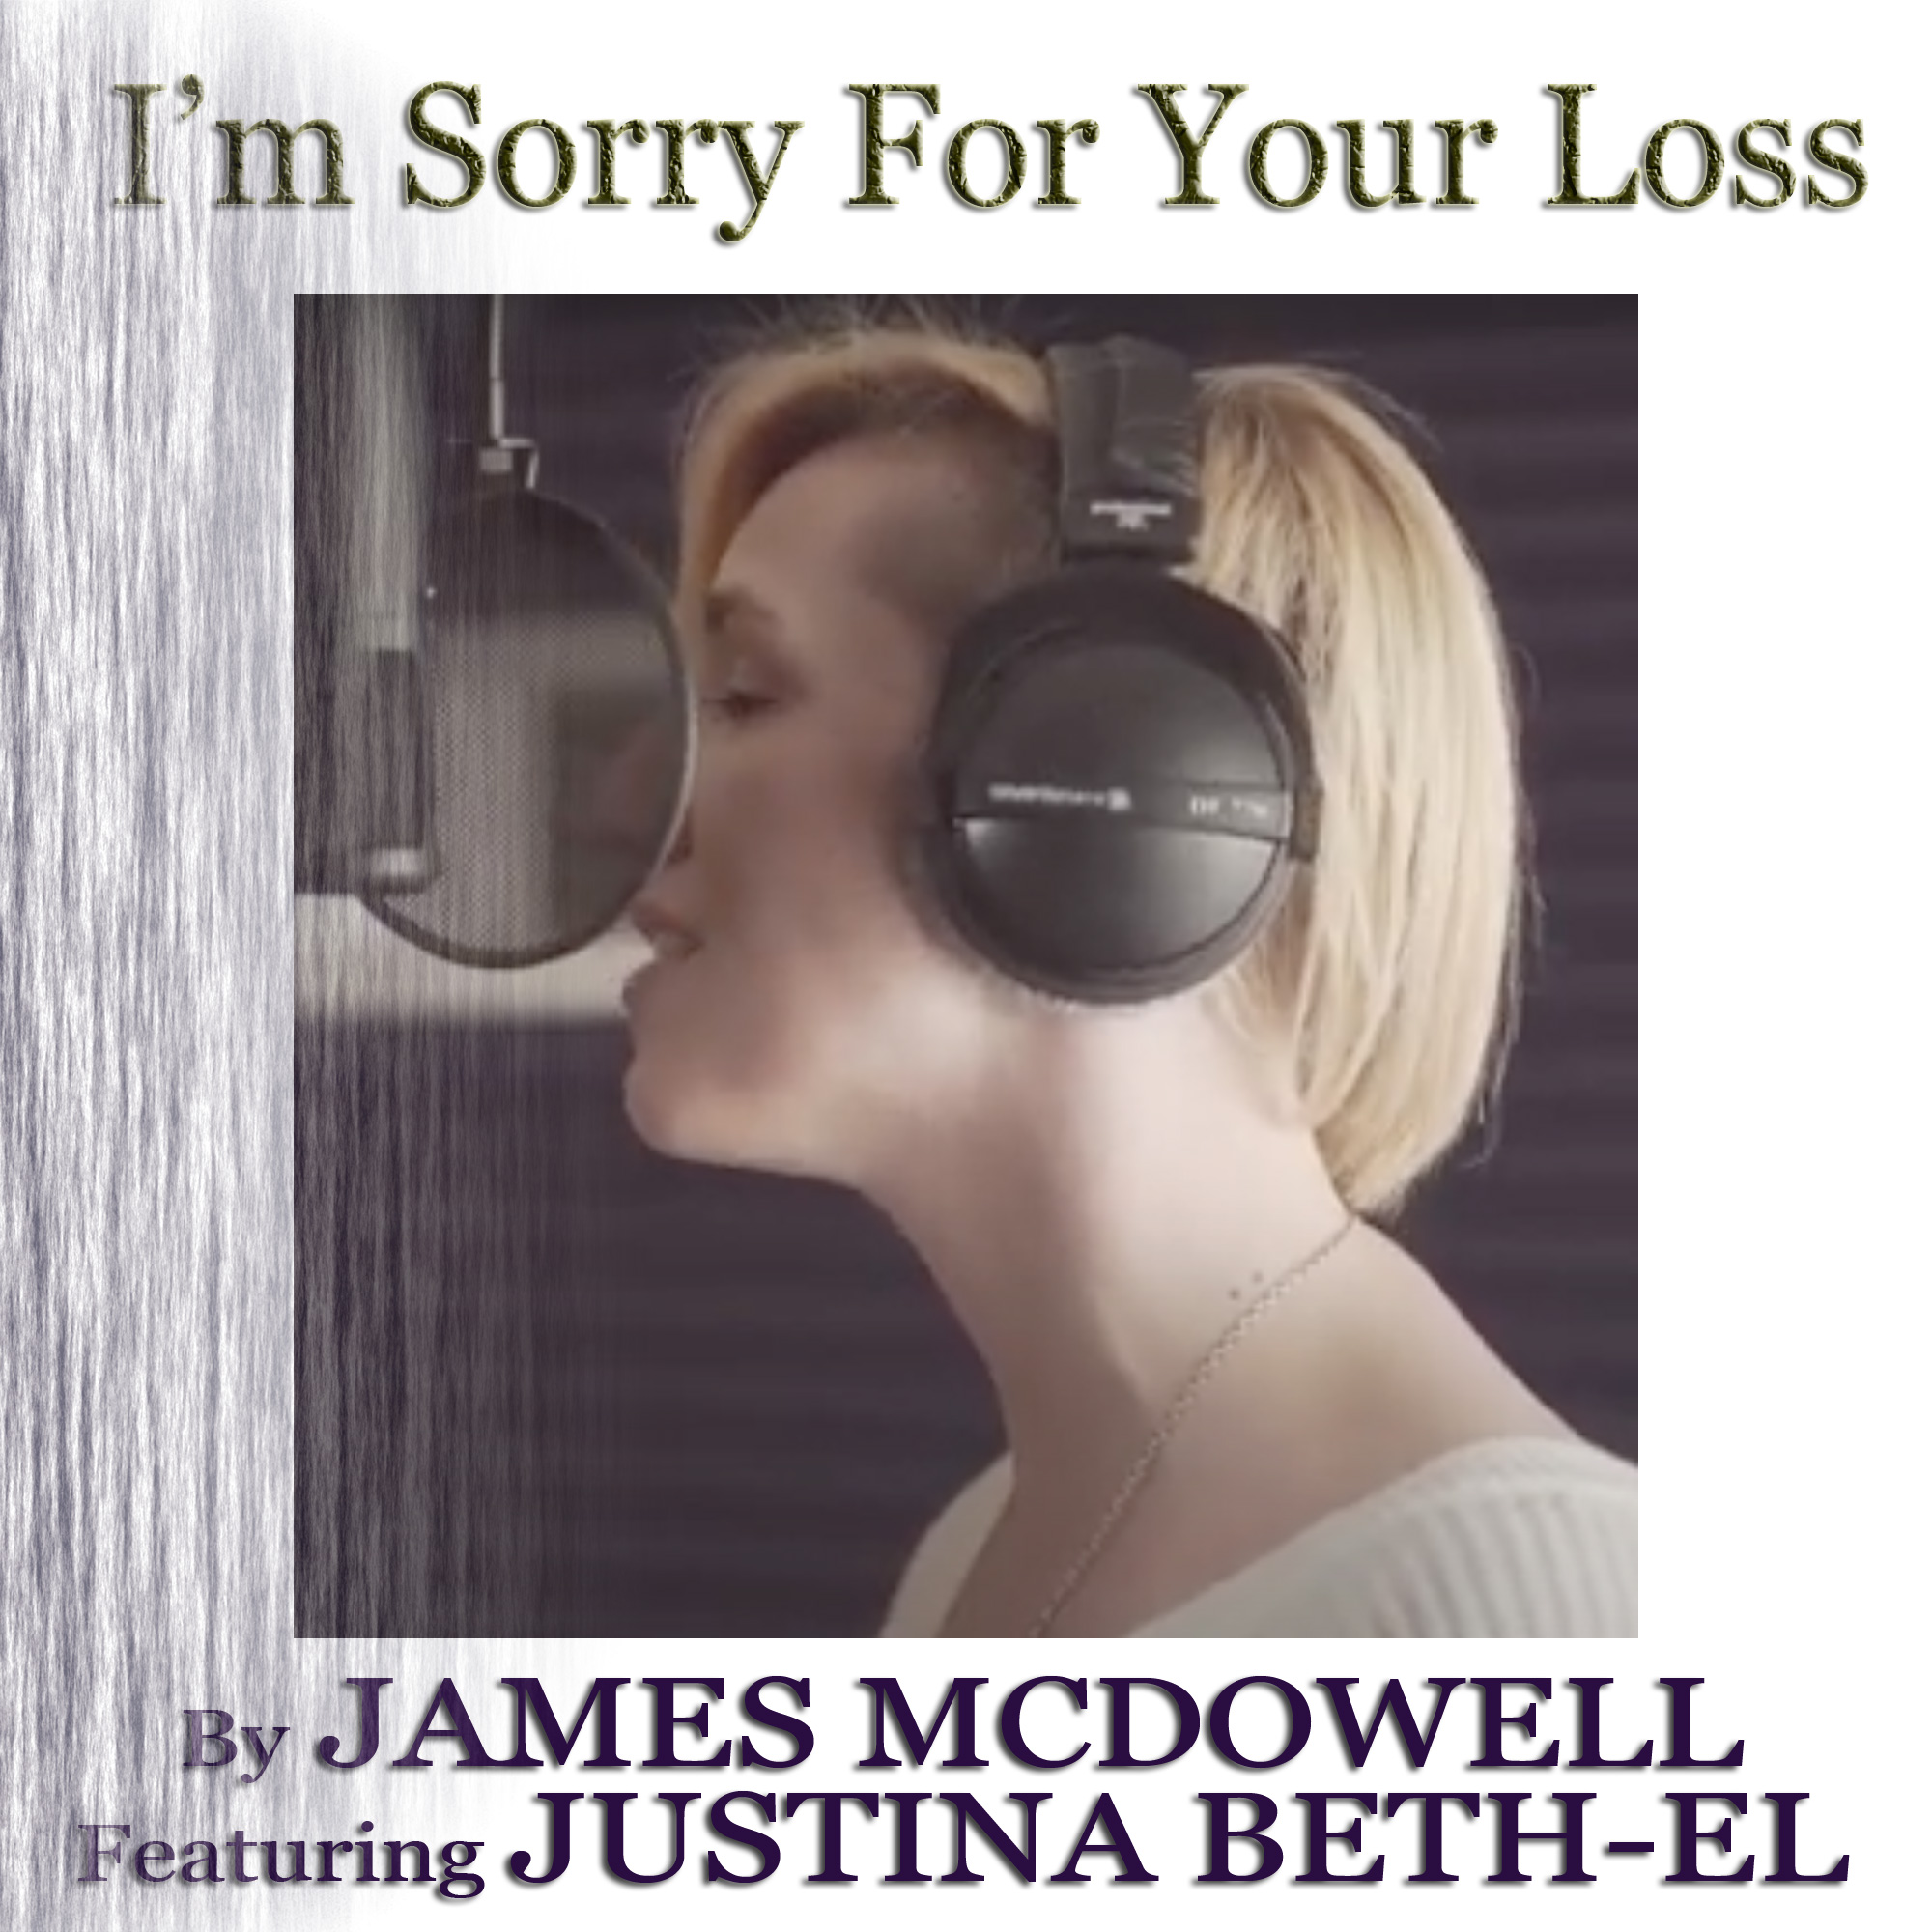 A Heartfelt and Invigorating Ode for the Souls Burdened with Grief: James McDowell Releases New Single